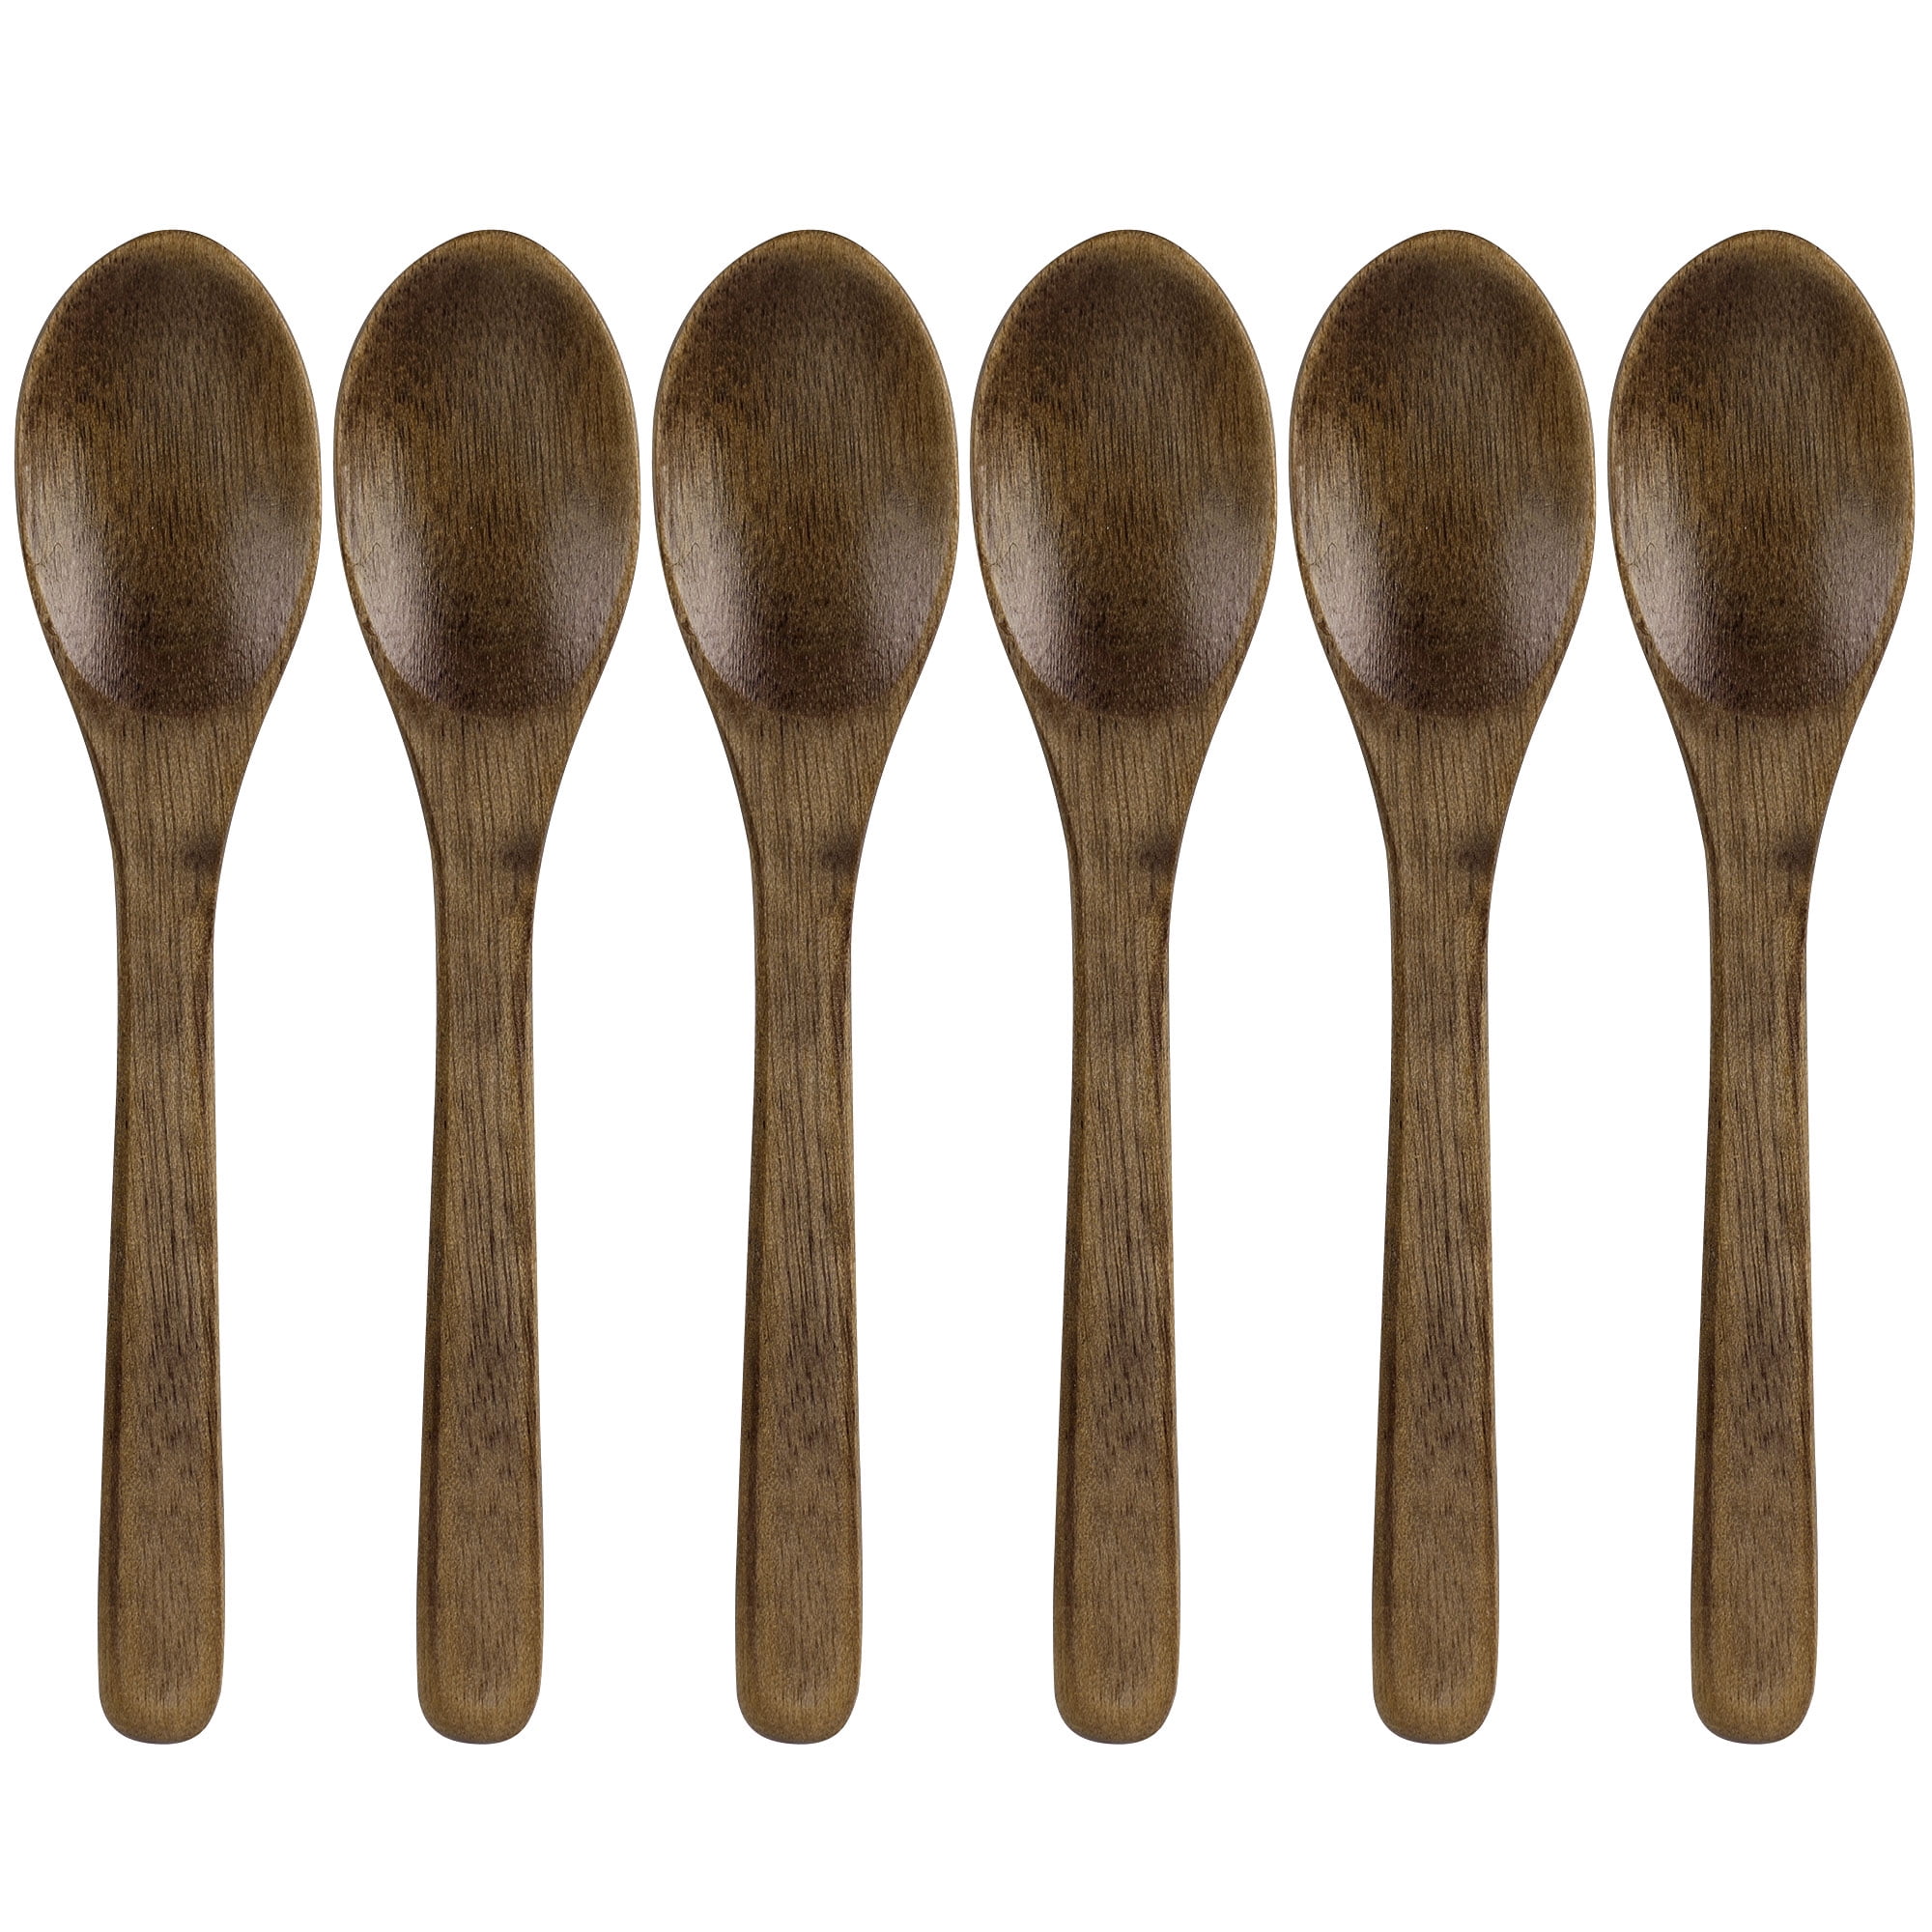 6pcs Wood Spoons Soup Eco Friendly Japanese Tableware Natural for sale online 